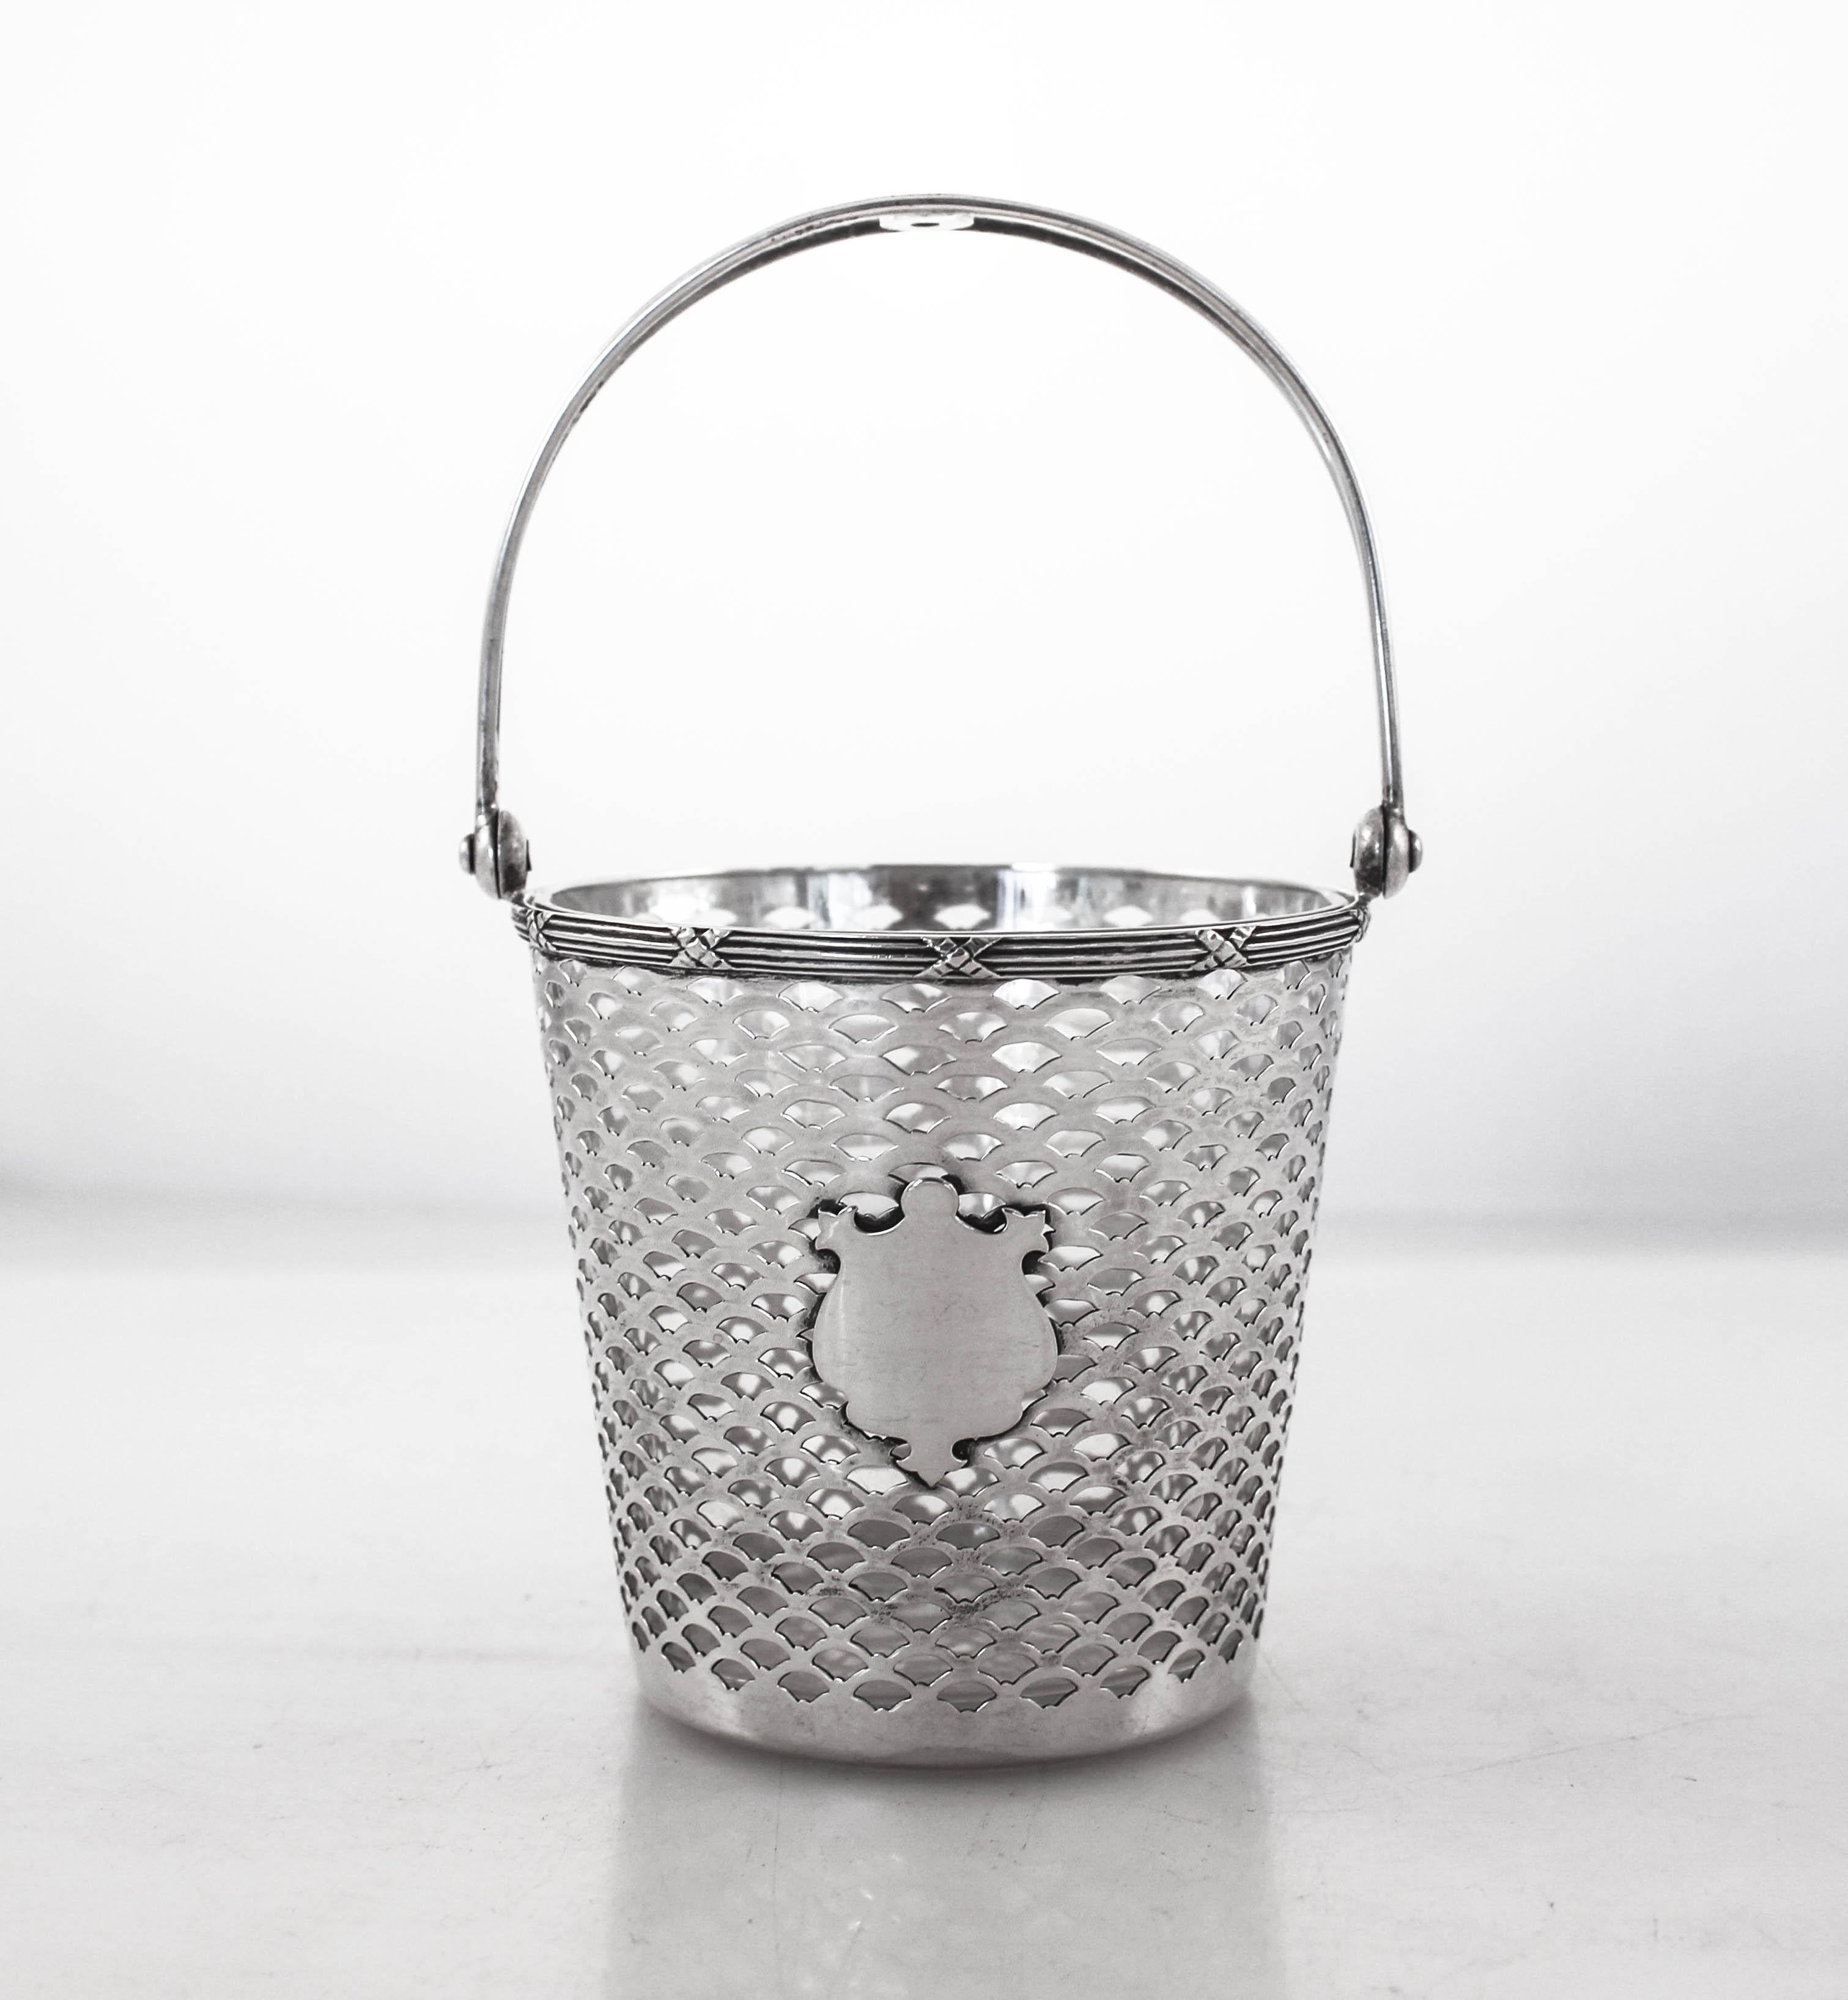 We’re just gaga over this sterling silver bucket with a glass insert. Done in an arts and crafts style it has an open work pattern. In the center a cartouche awaits your monogram. The handle folds up and down for easy storage. The glass insert comes